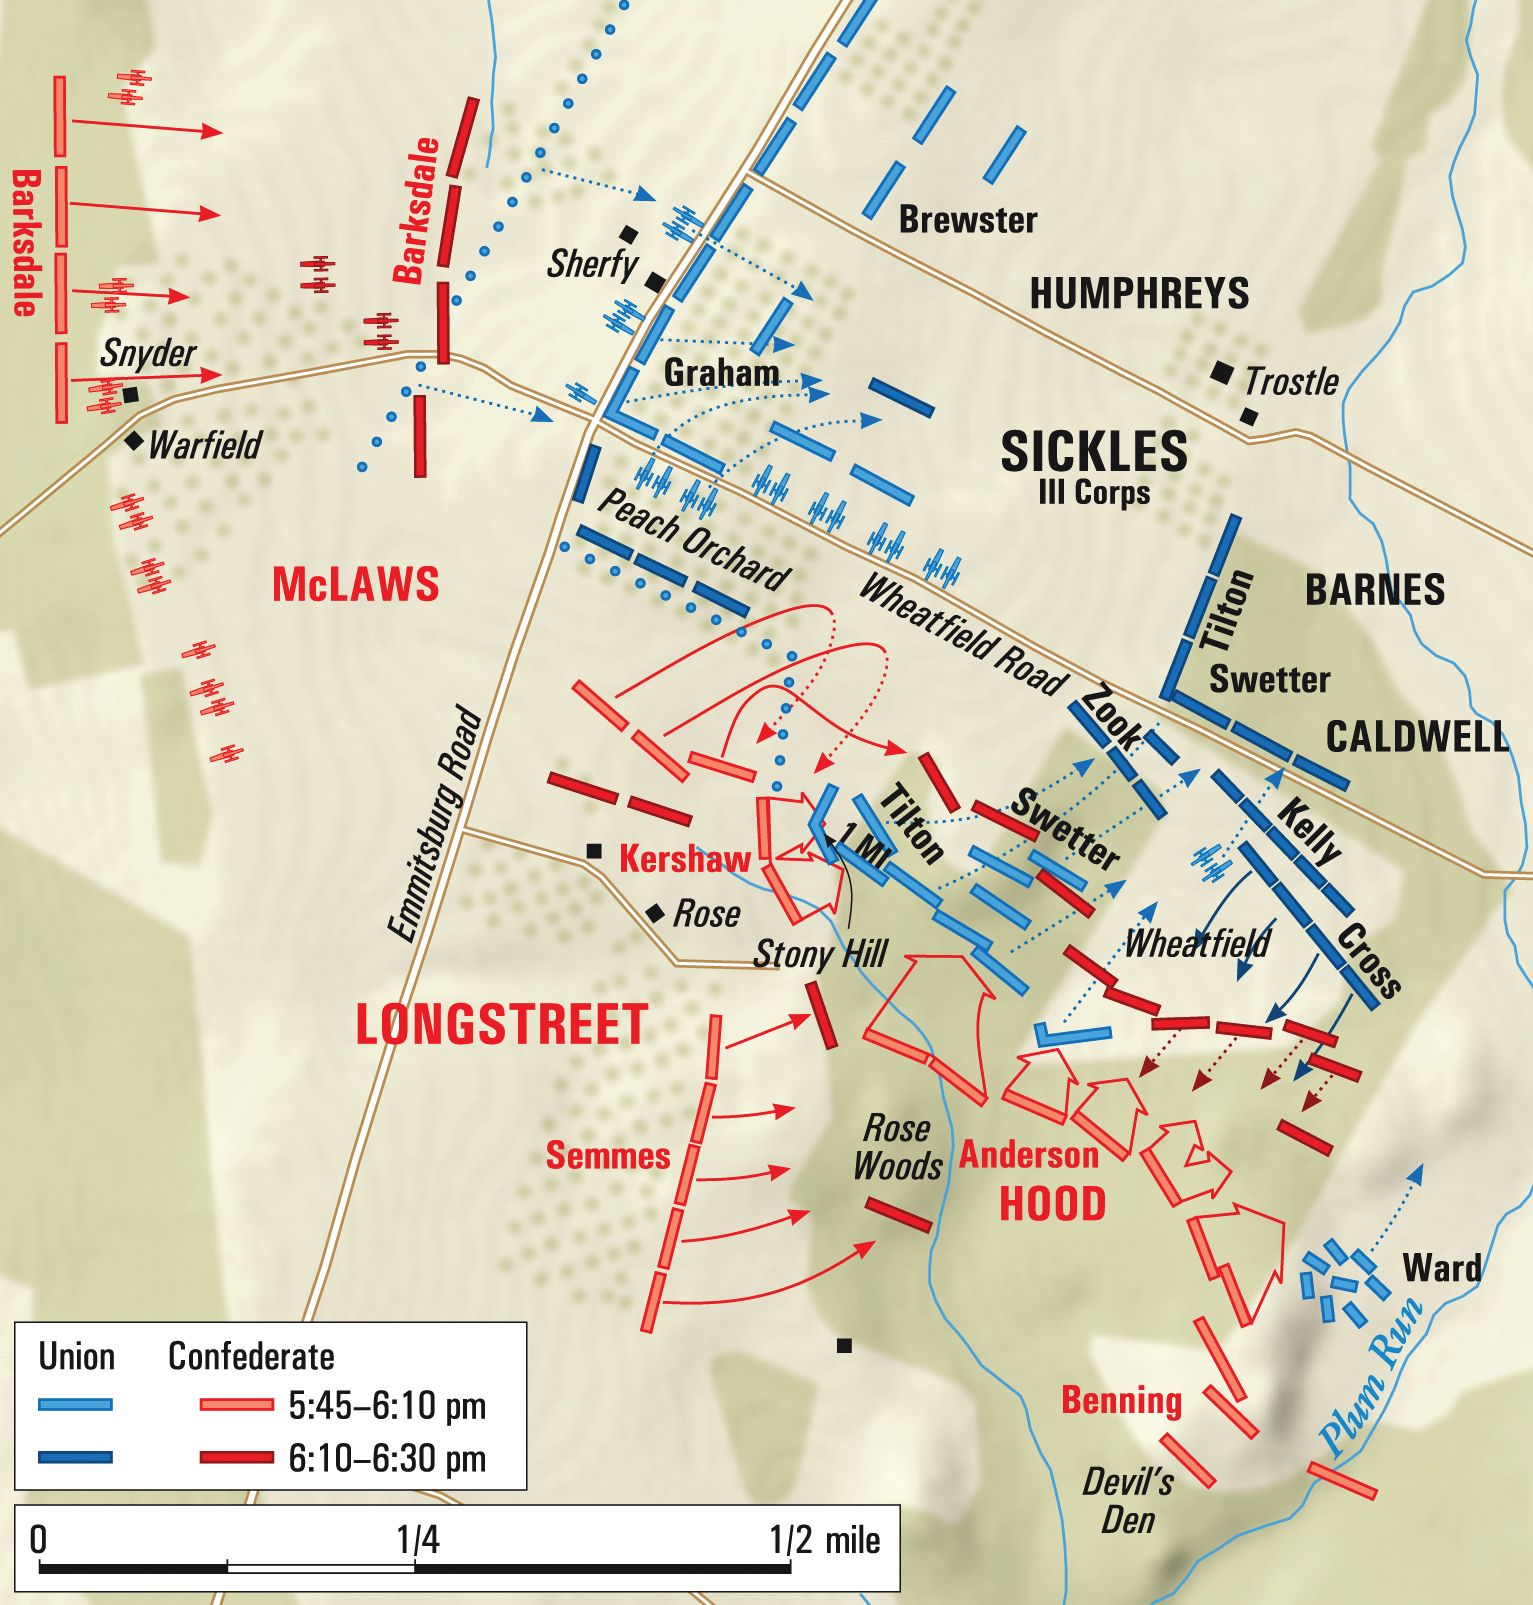 Now Colonel of the First Michigan, Abbott and his men, along with other V Corps units at Gettysburg, were sent forward to the Wheatfield, as General James Longstreet’s Confederates sought to roll up the Union flank. 